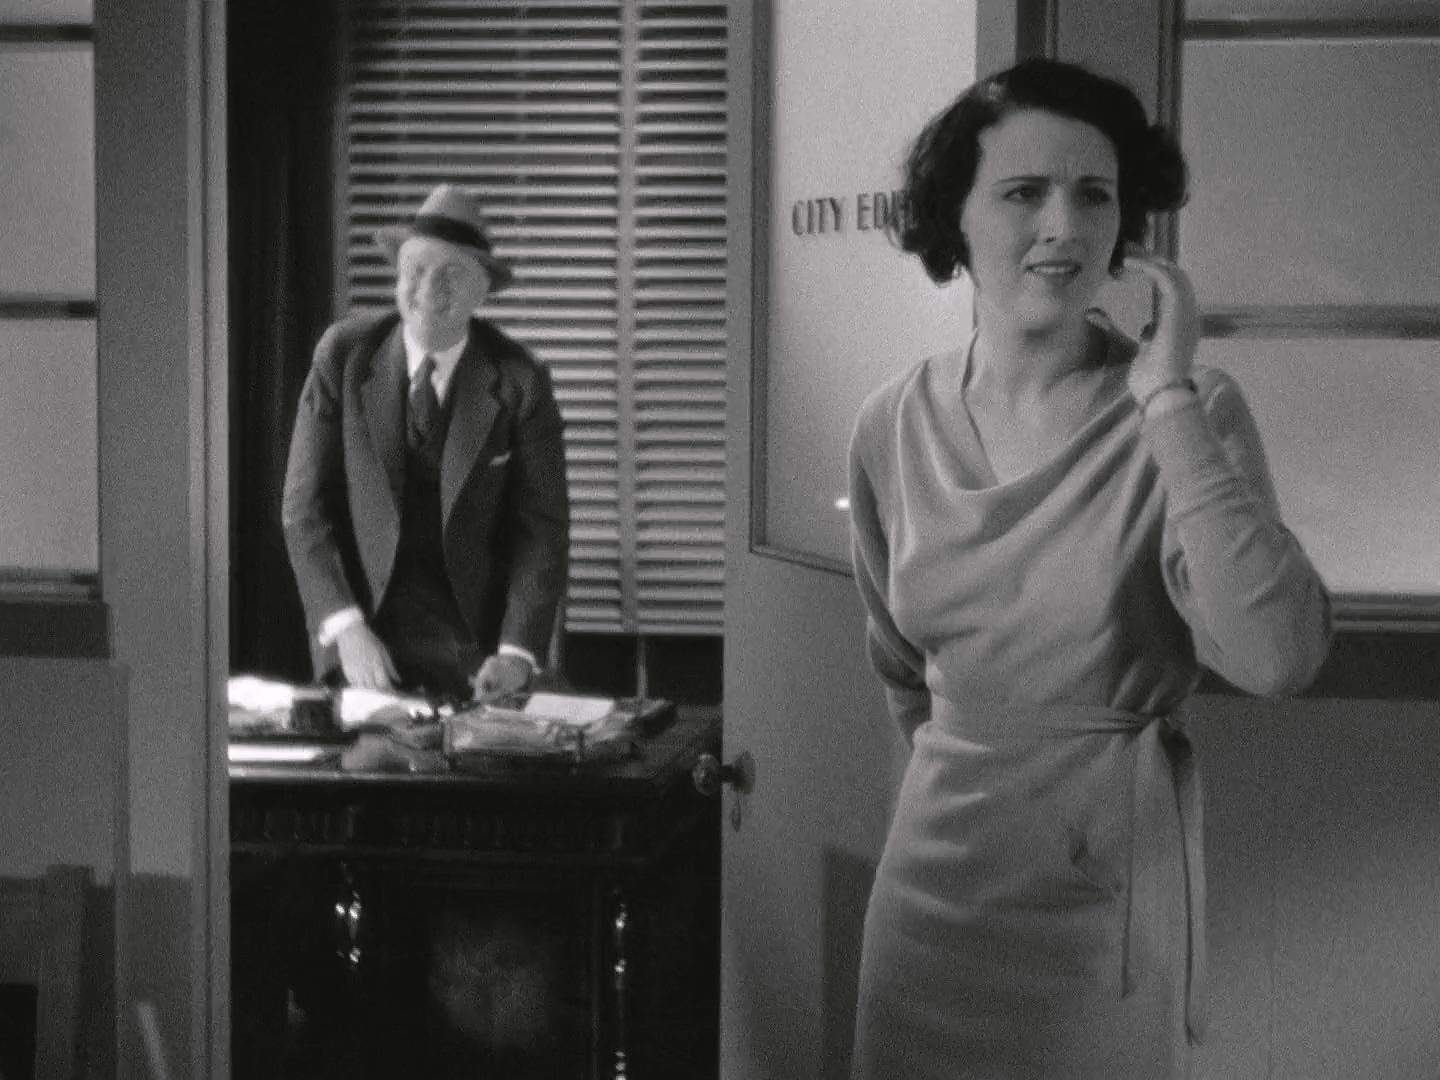 It Happened One Night (1934) | Bess Flowers and Charles C. Wilson in It Happened One Night (1934)